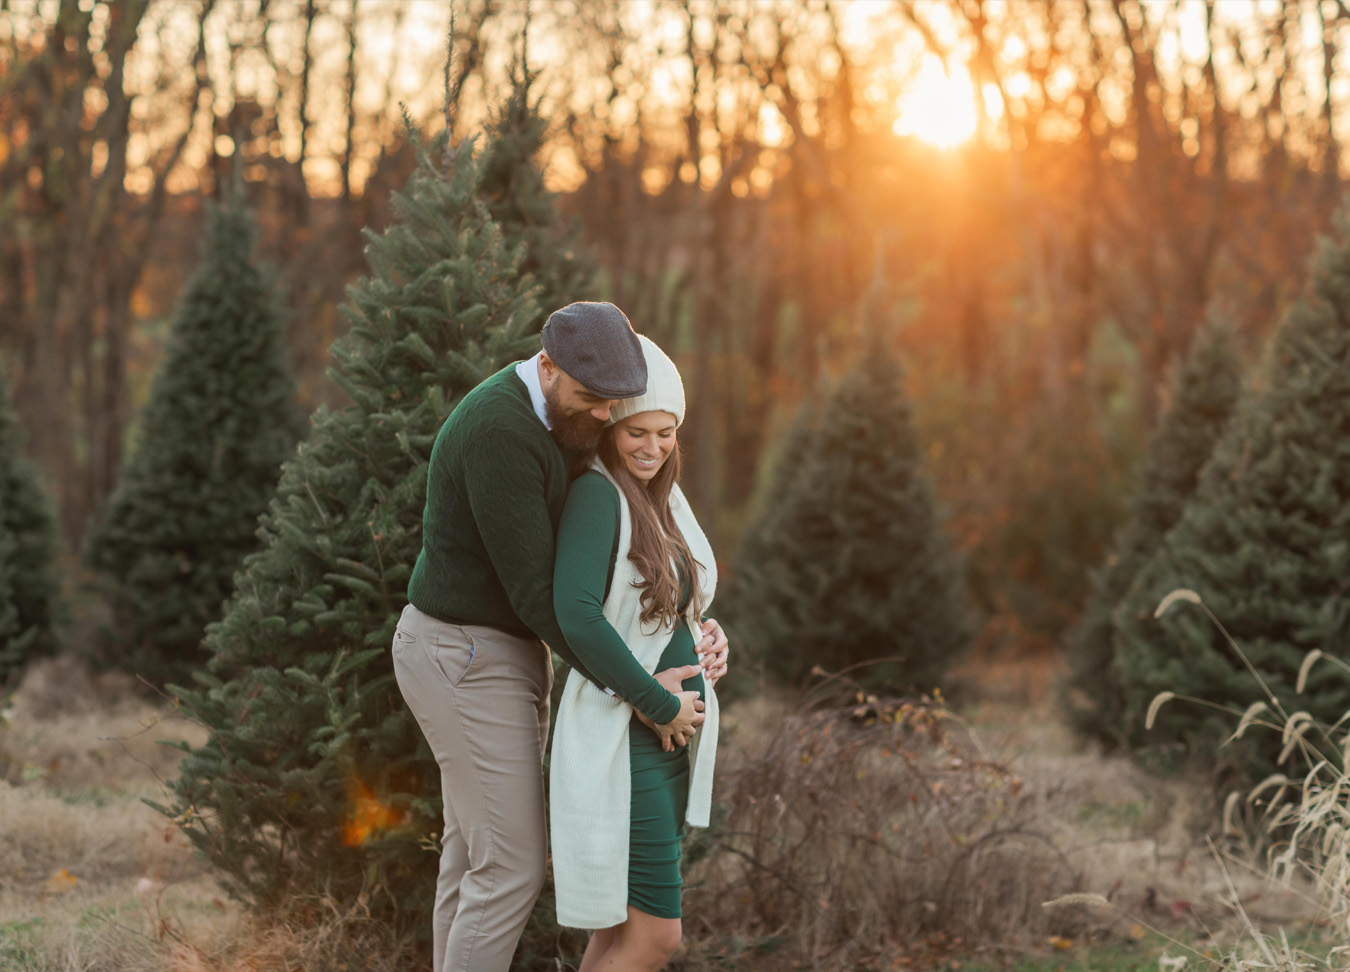 Christmas Maternity Photoshoot in Northern Virginia featuring a pregnant woman and her hubsand